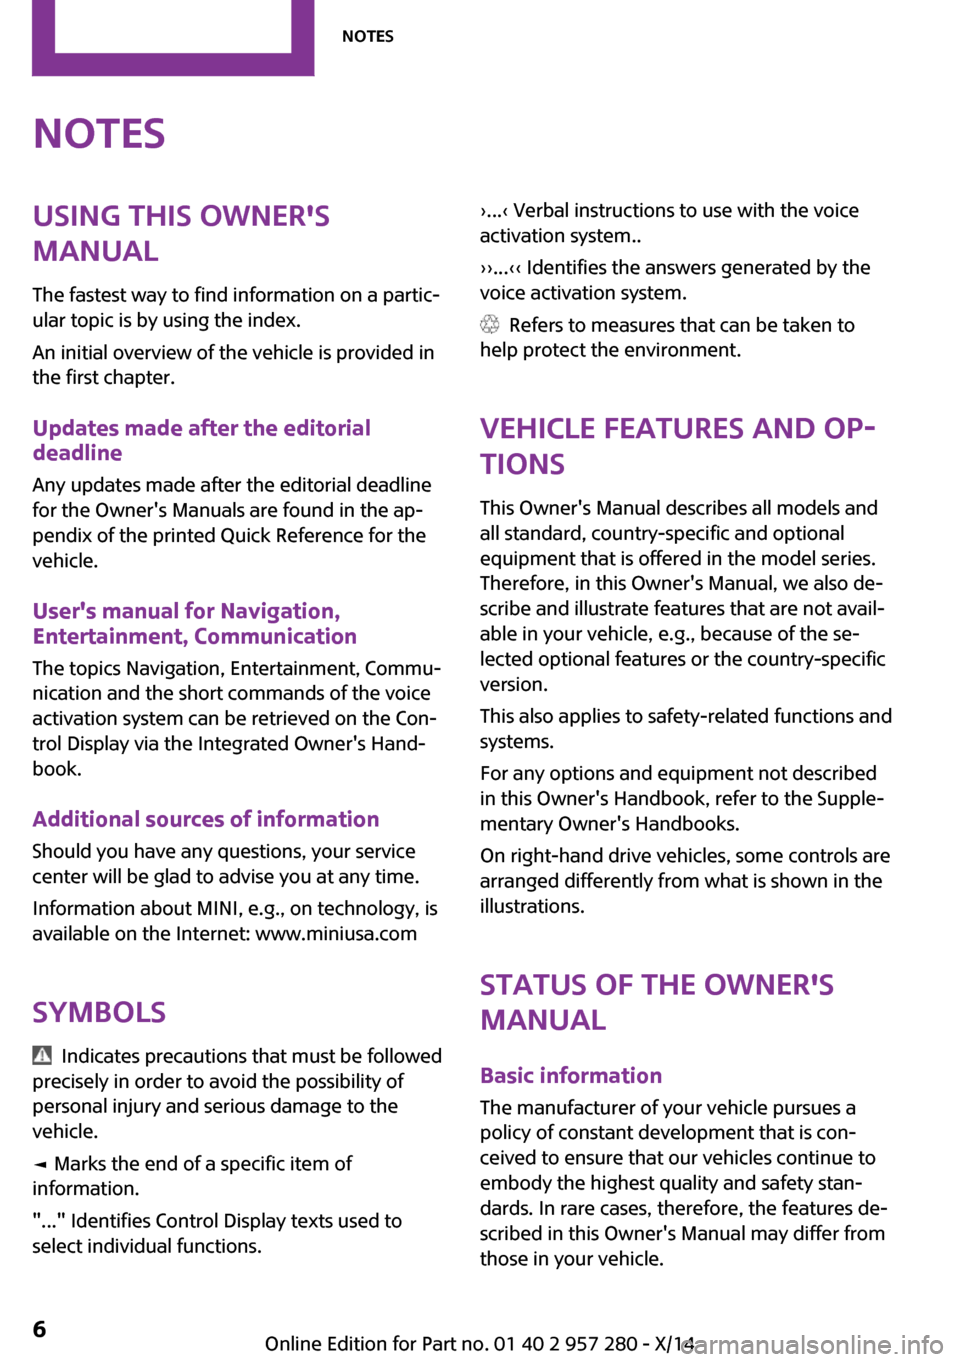 MINI 3 door 2014  Owners Manual NotesUsing this Owners
Manual
The fastest way to find information on a partic‐
ular topic is by using the index.
An initial overview of the vehicle is provided in
the first chapter.
Updates made af